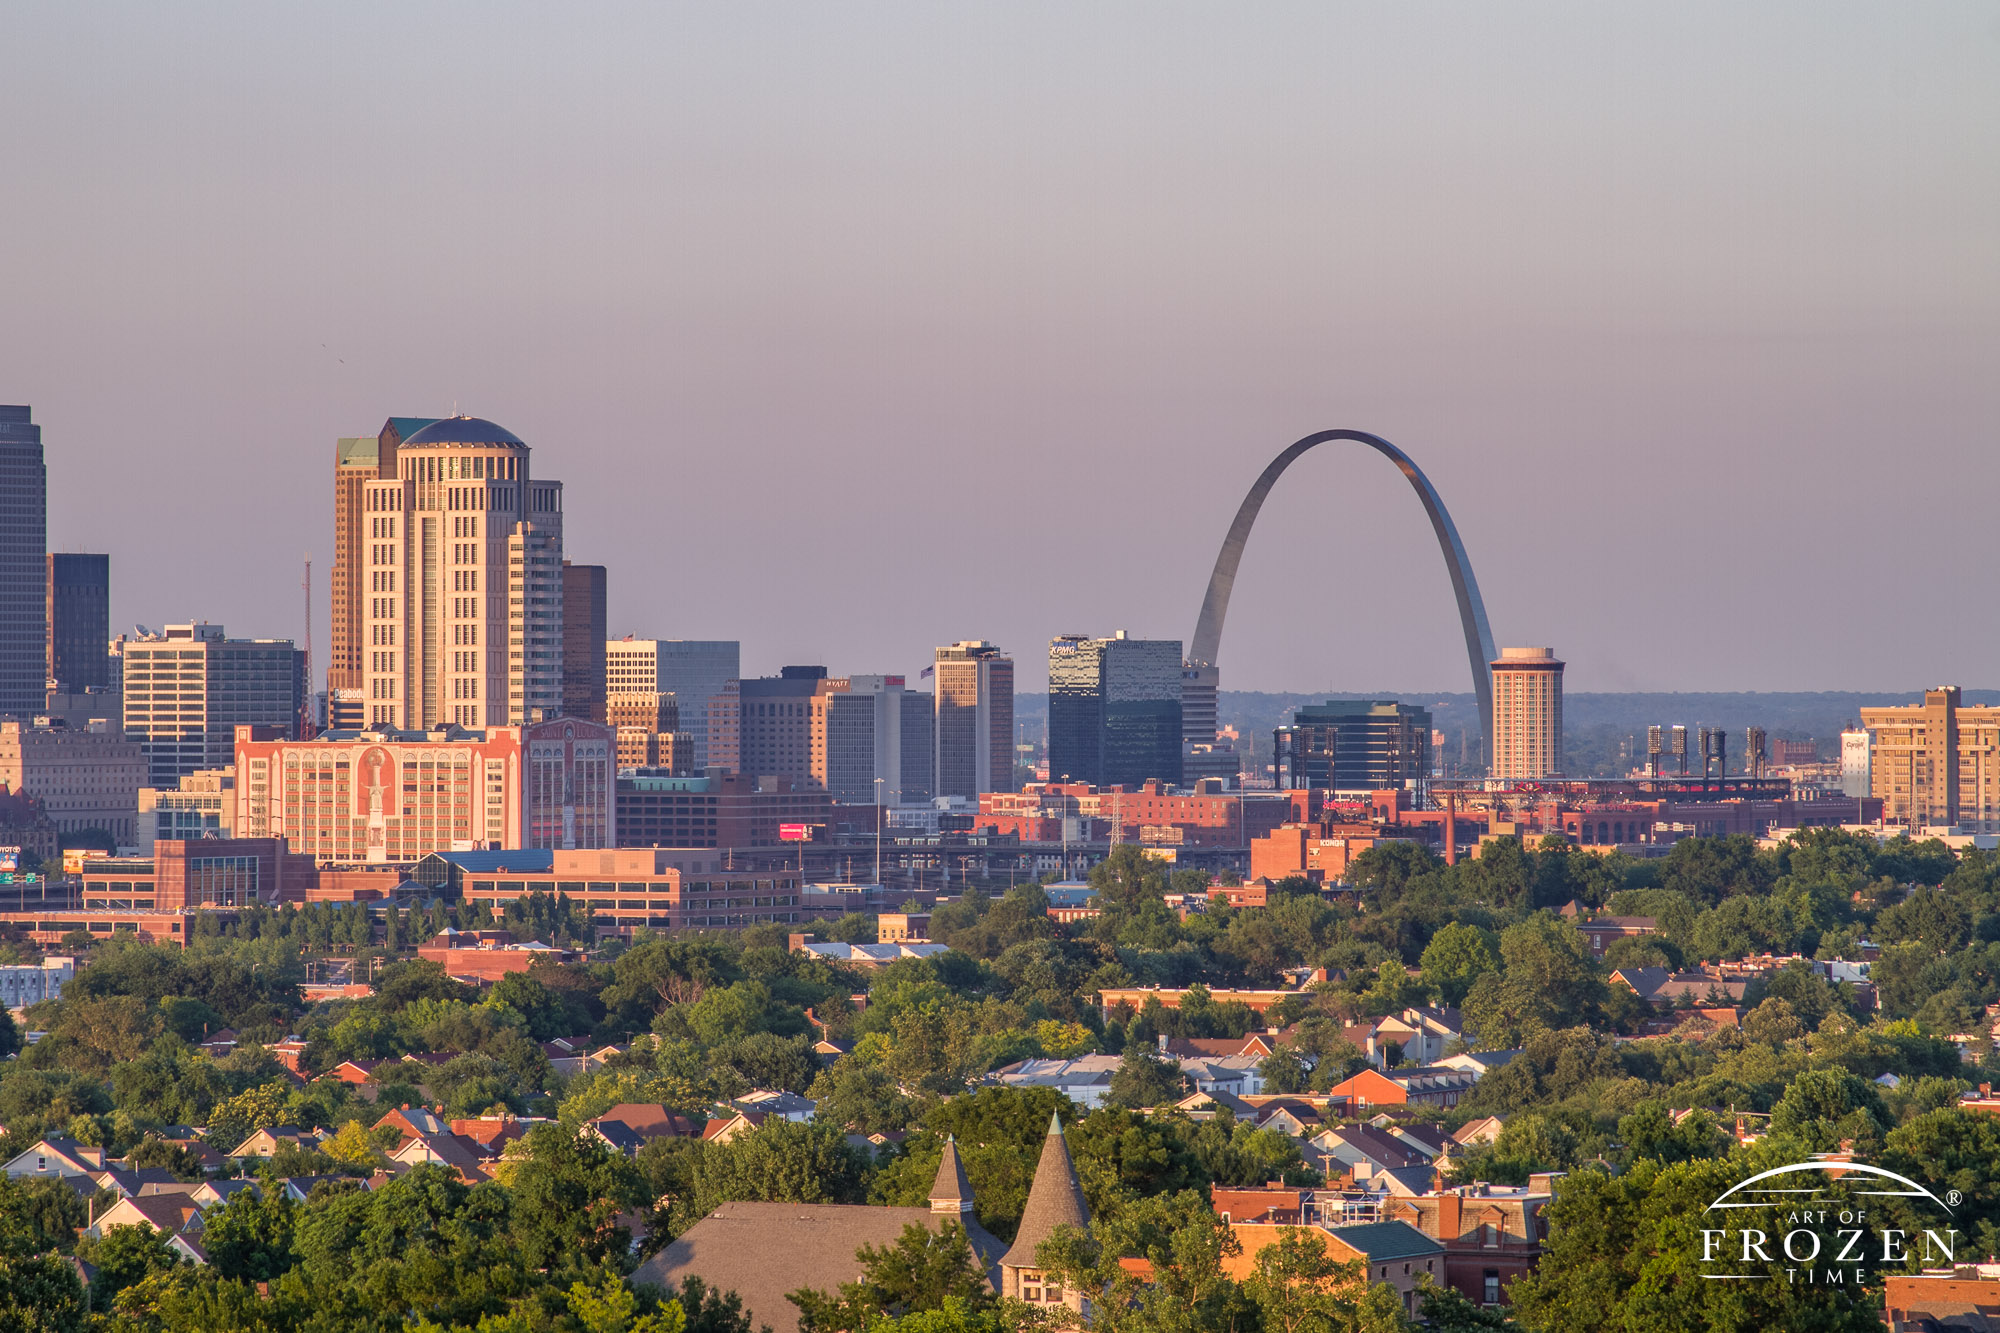 The St Louis Skyline painted in golden light from the evening sun